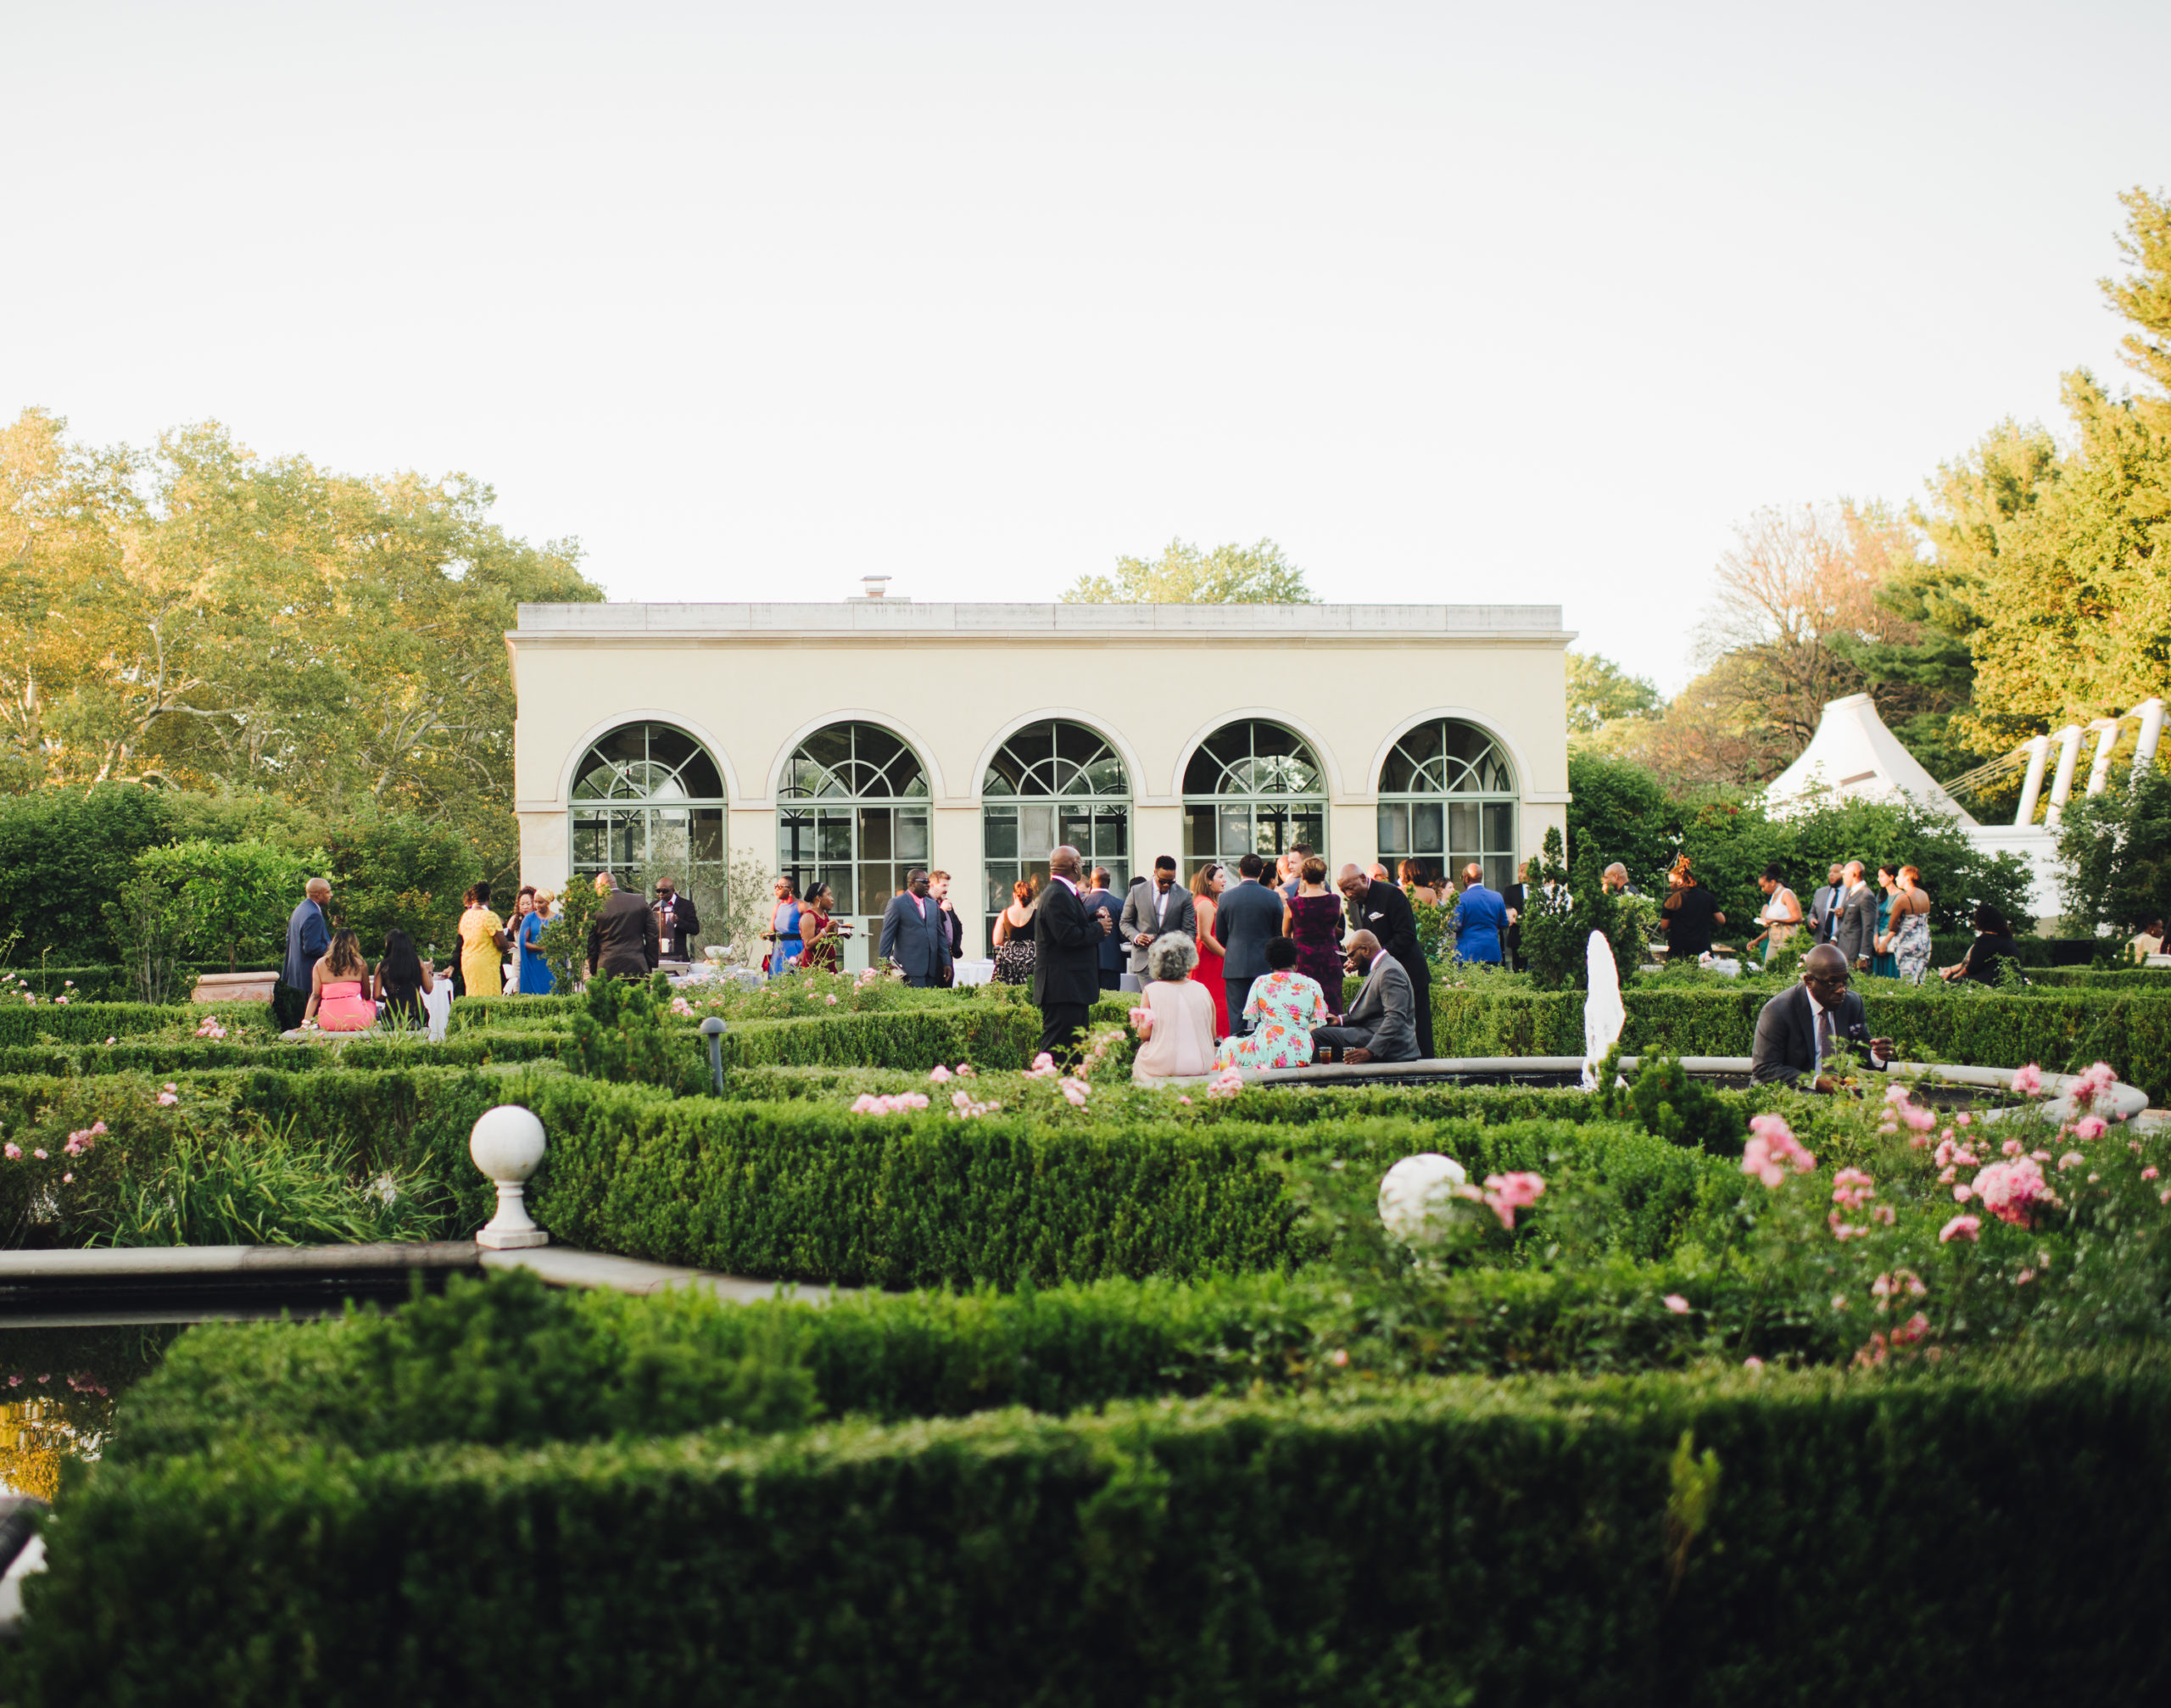 Outdoor New York City wedding venue where the guests mingle among perfectly trimmed bushes at an intimate venue